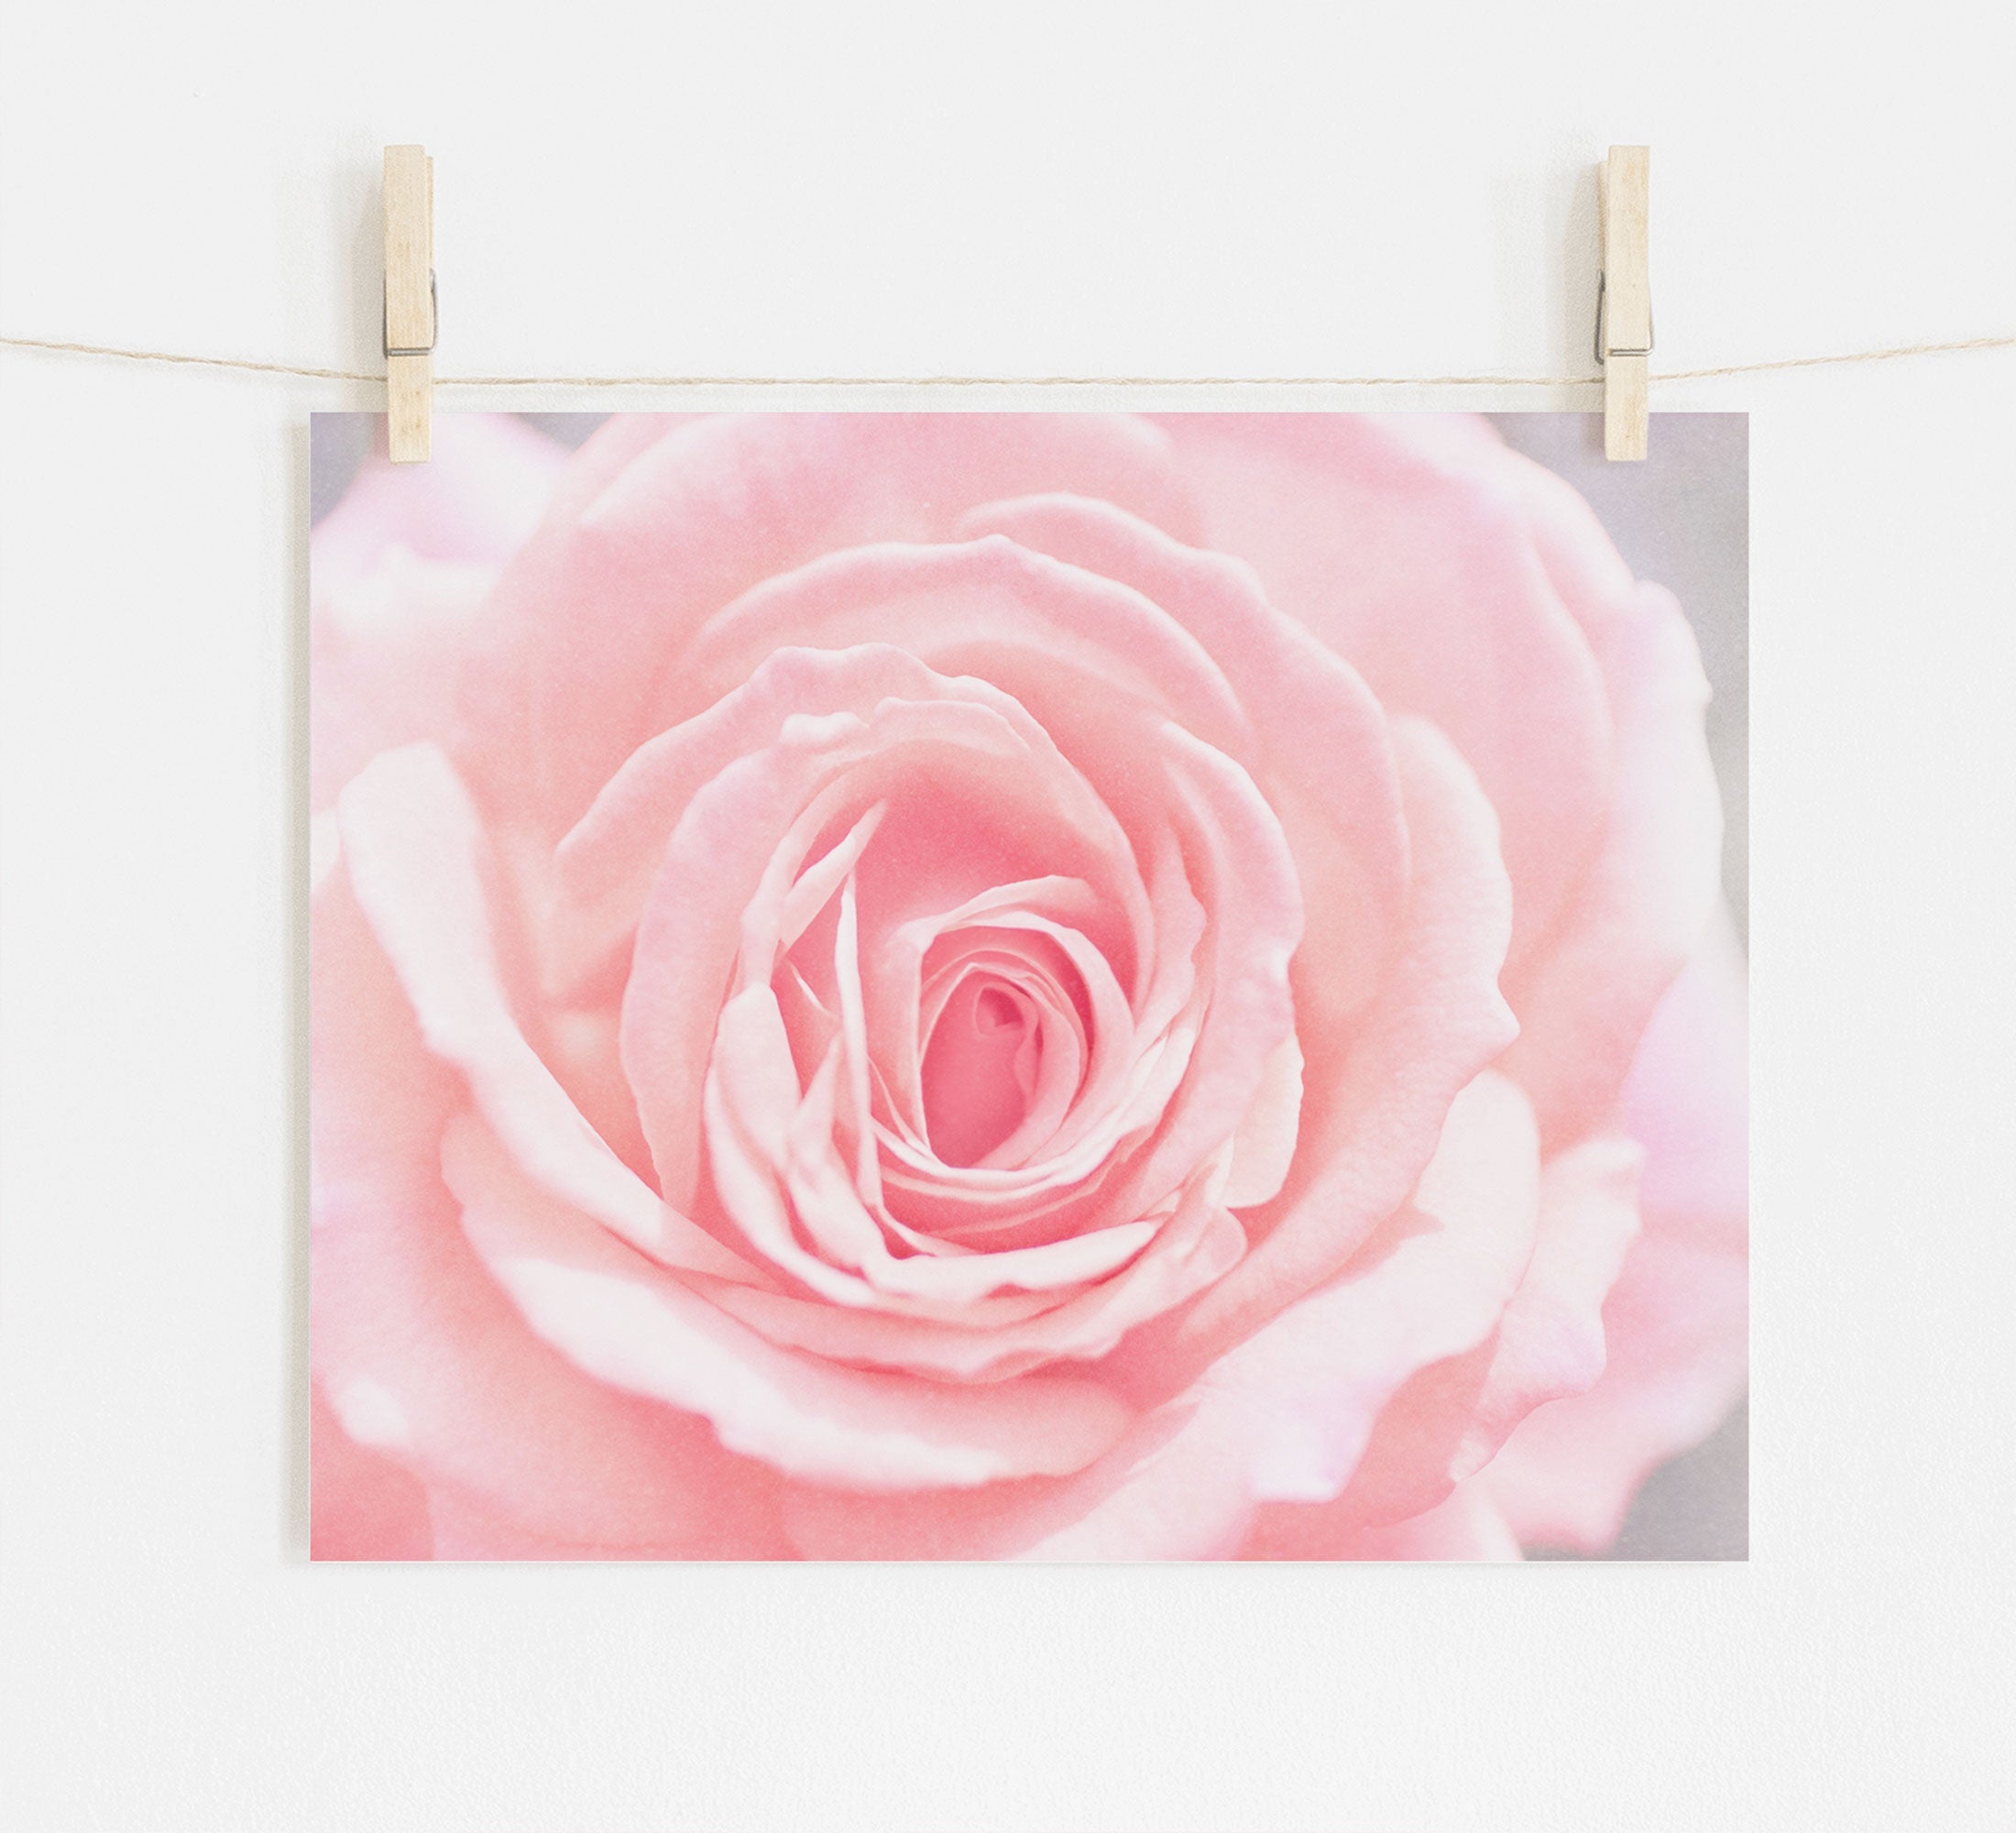 A close-up photo of a Pink Rose Print in bloom, displaying its detailed petals, is pinned by wooden clothespins on a string against a white wall. (Offley Green)